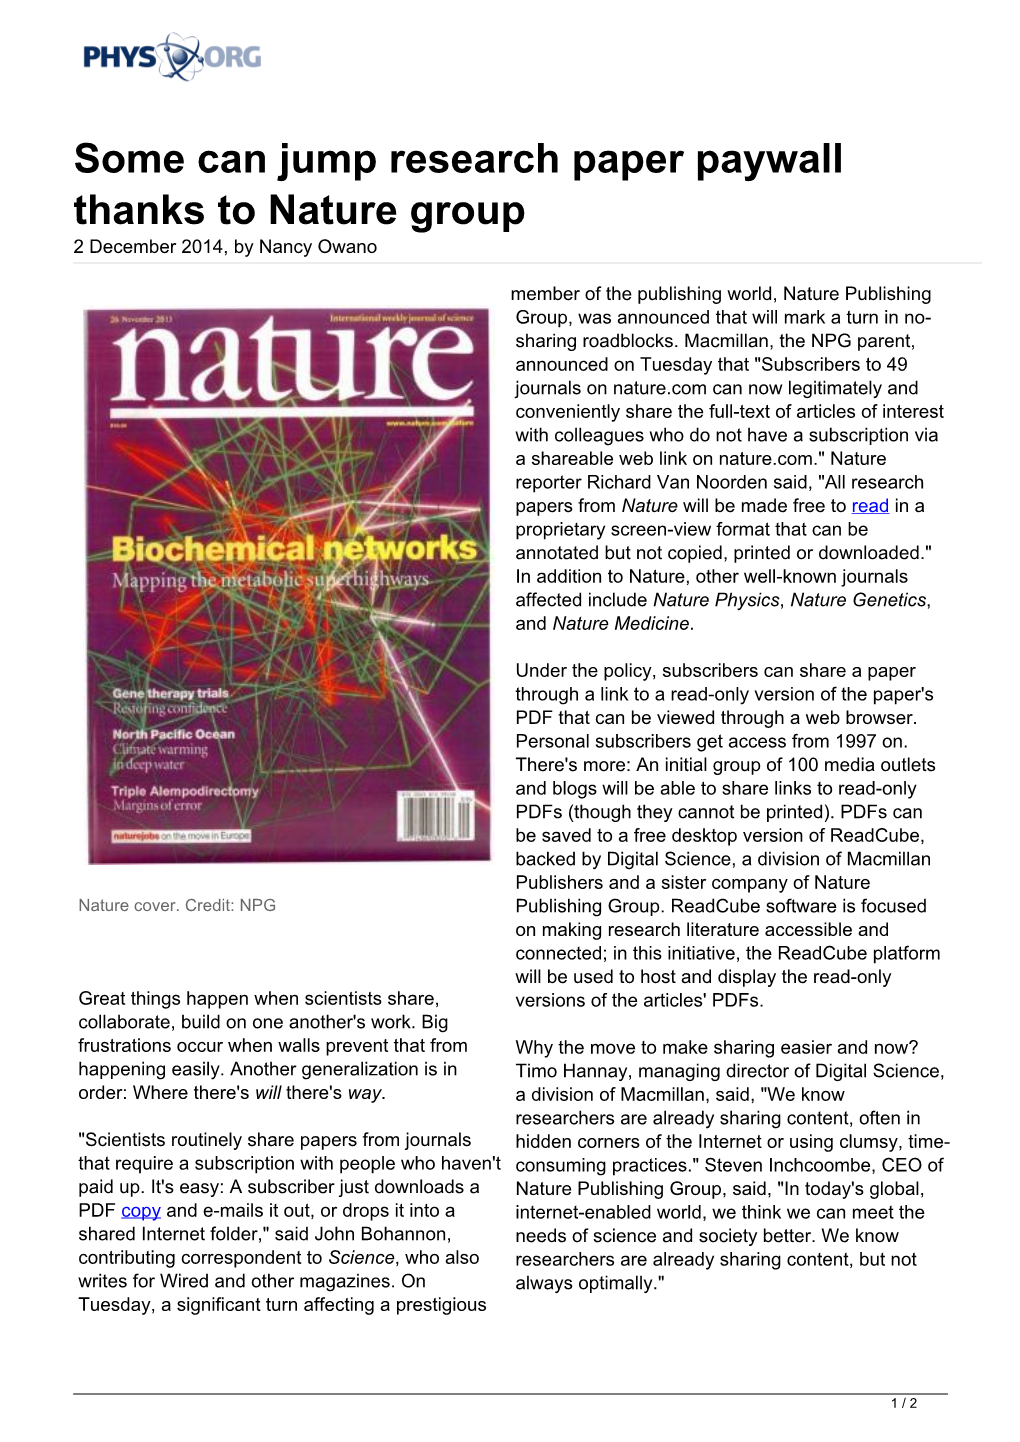 Some Can Jump Research Paper Paywall Thanks to Nature Group 2 December 2014, by Nancy Owano